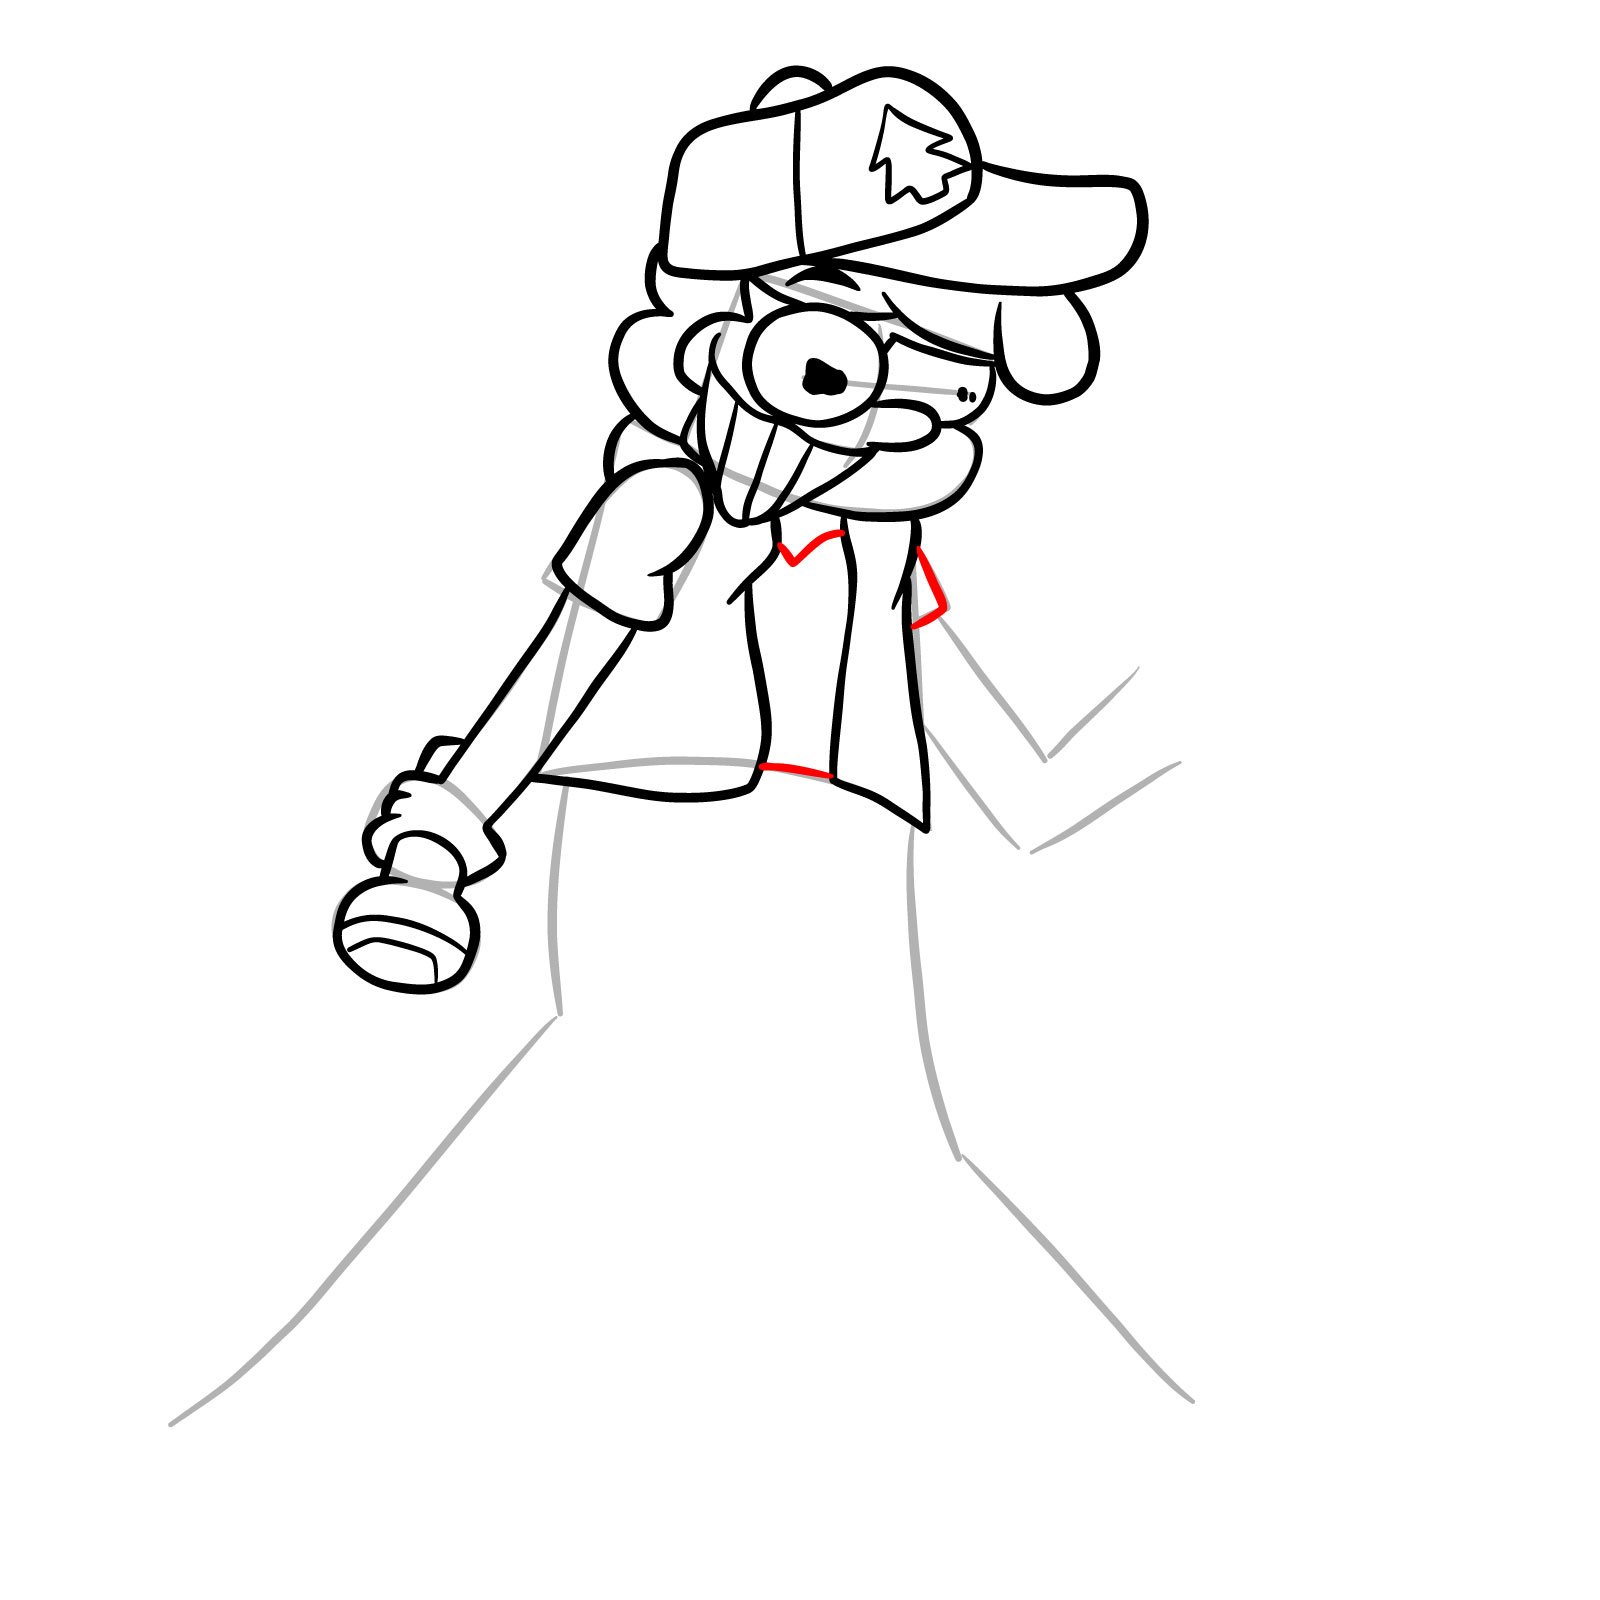 How to draw Mason Dipper Pines Glitched legends - step 21